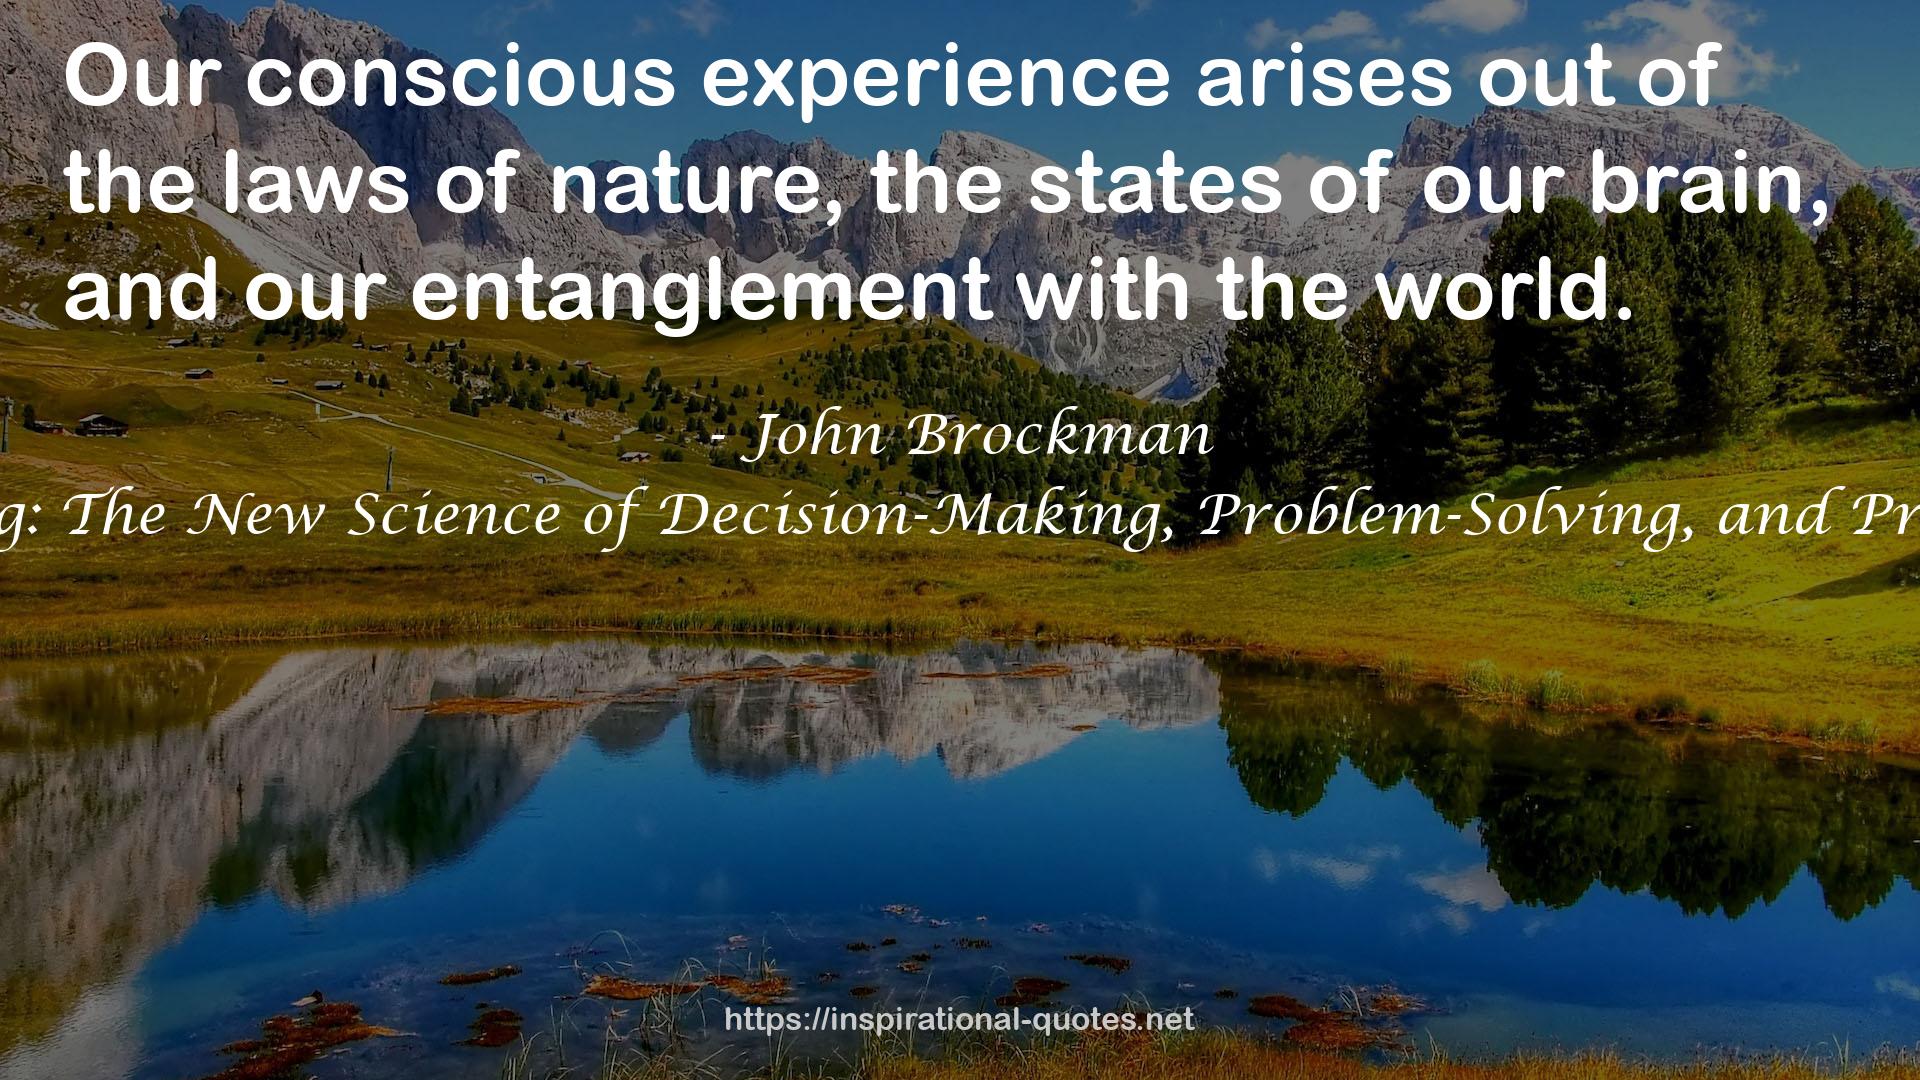 Thinking: The New Science of Decision-Making, Problem-Solving, and Prediction QUOTES